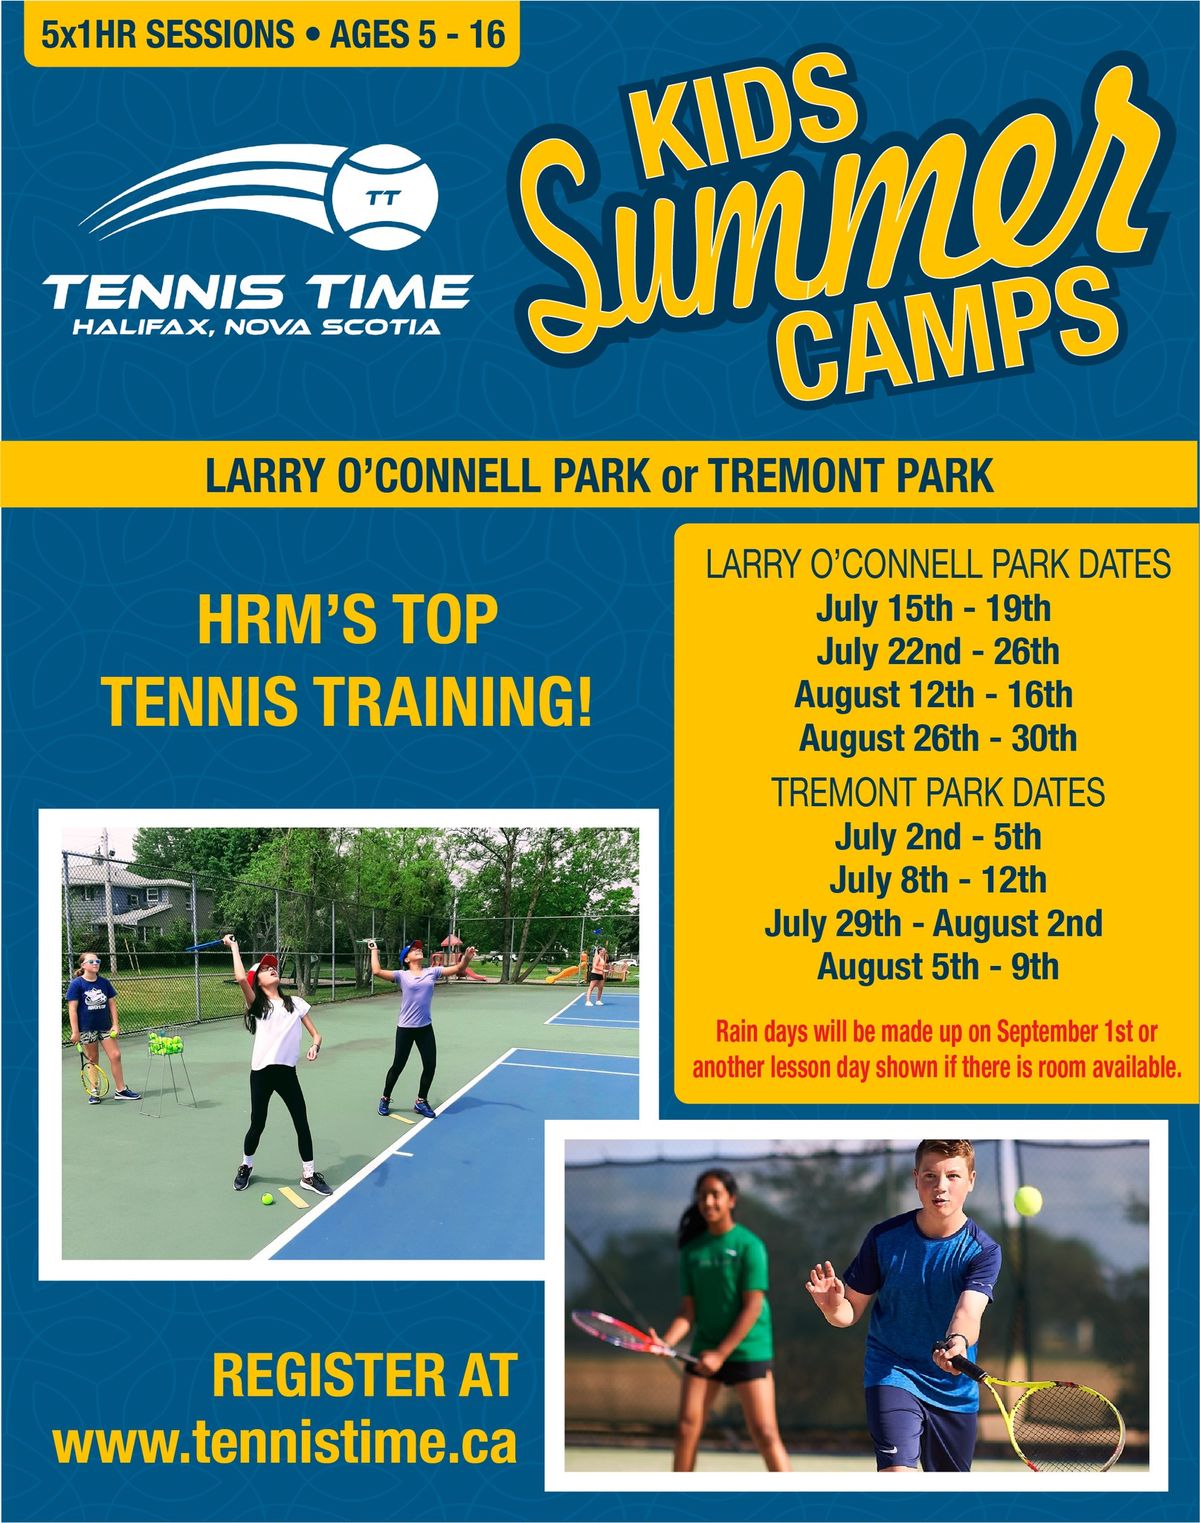 Summer Kids Camps at Larry O'Connell courts